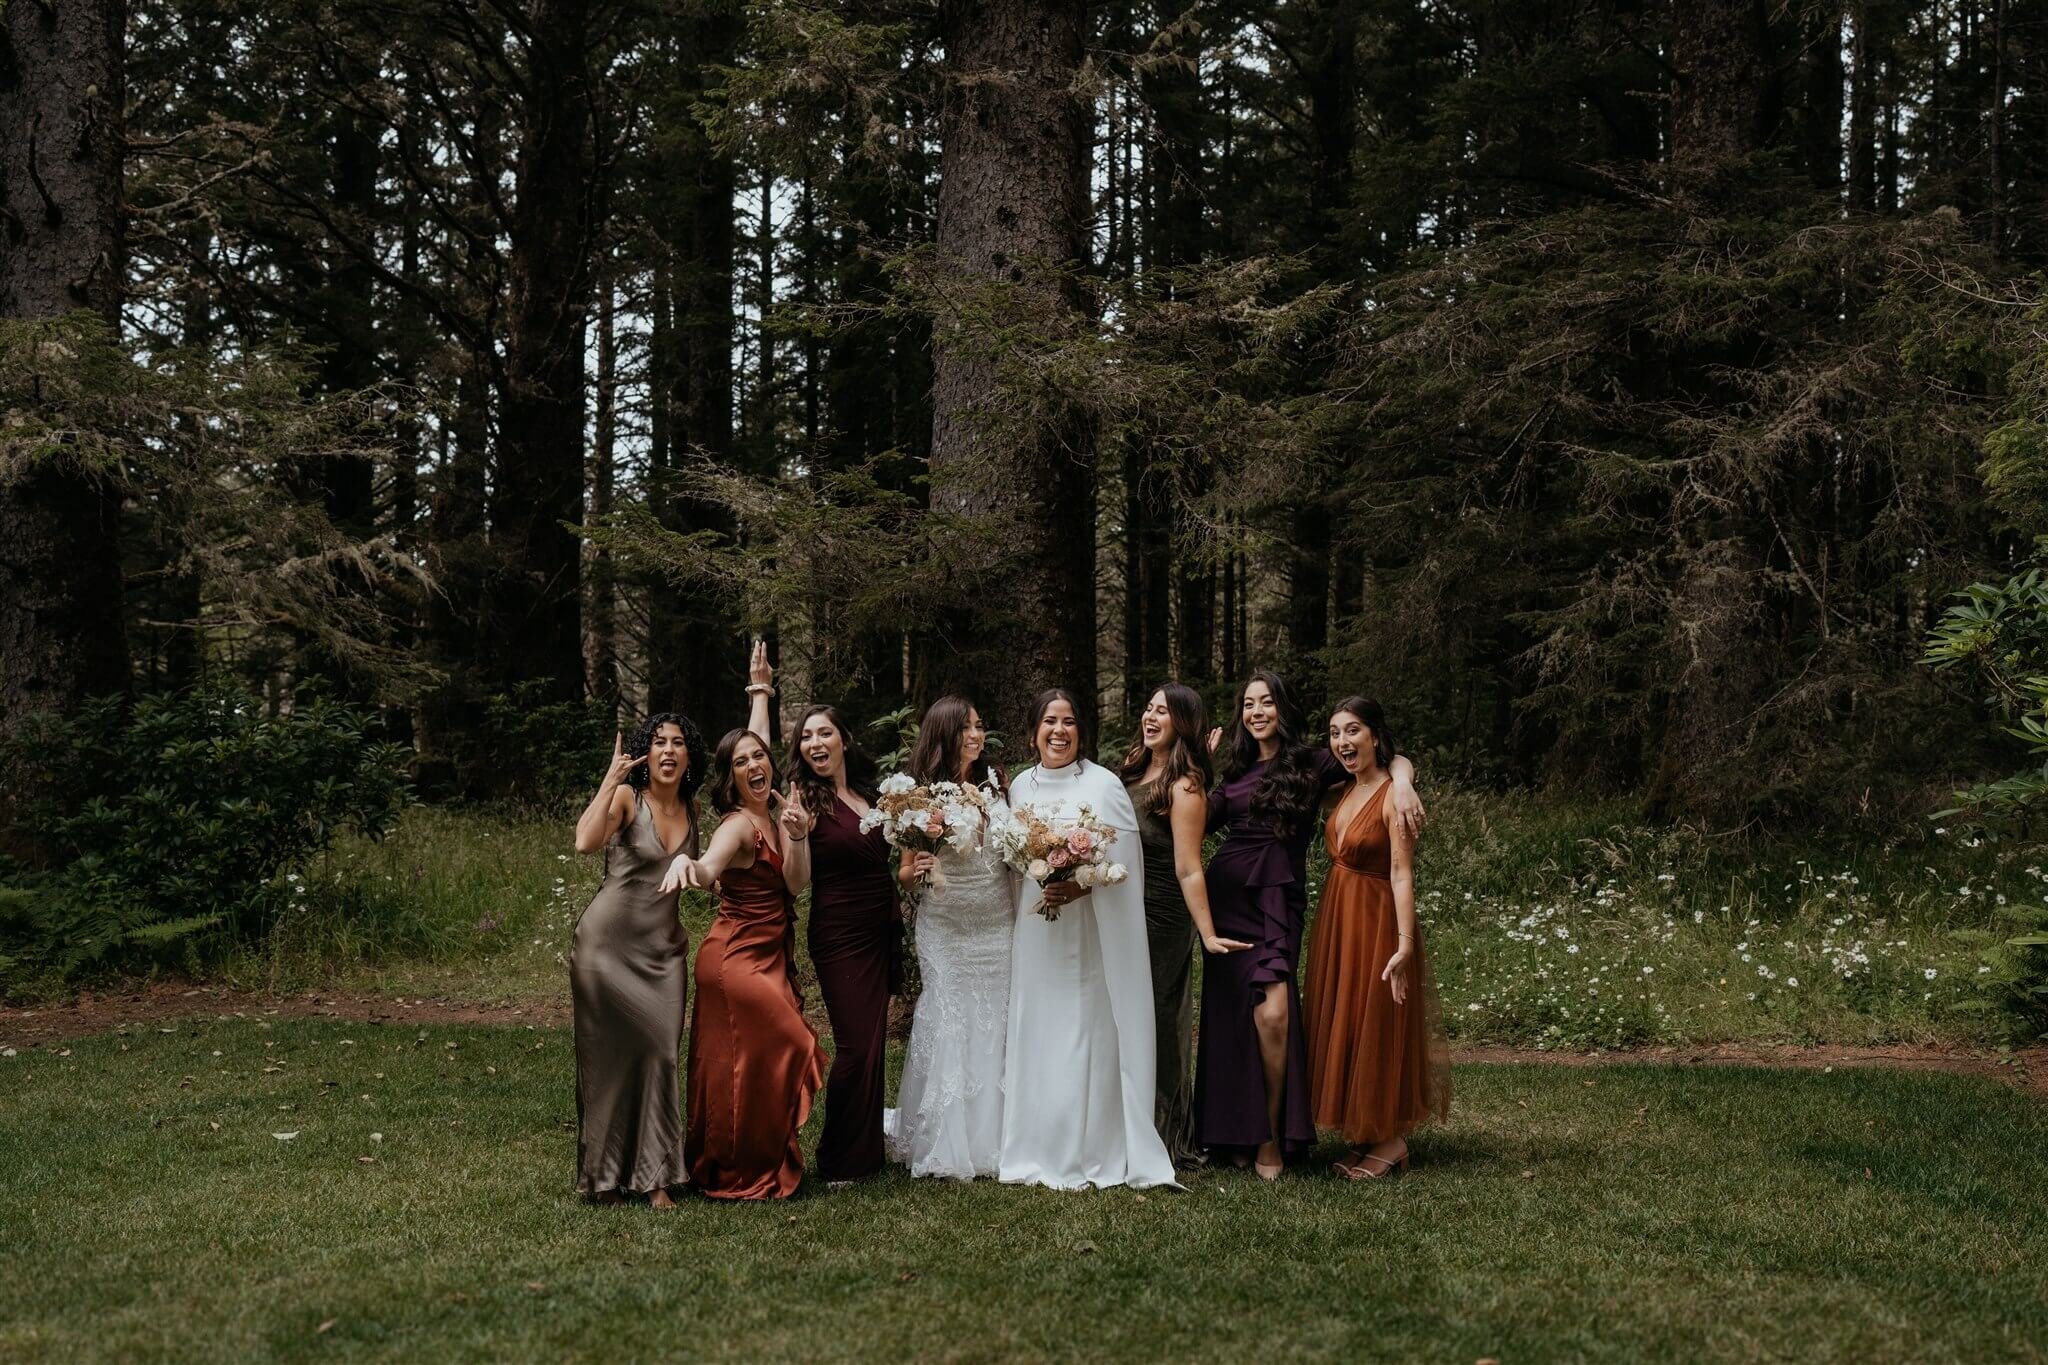 Bridal party portraits at flower-filled wedding